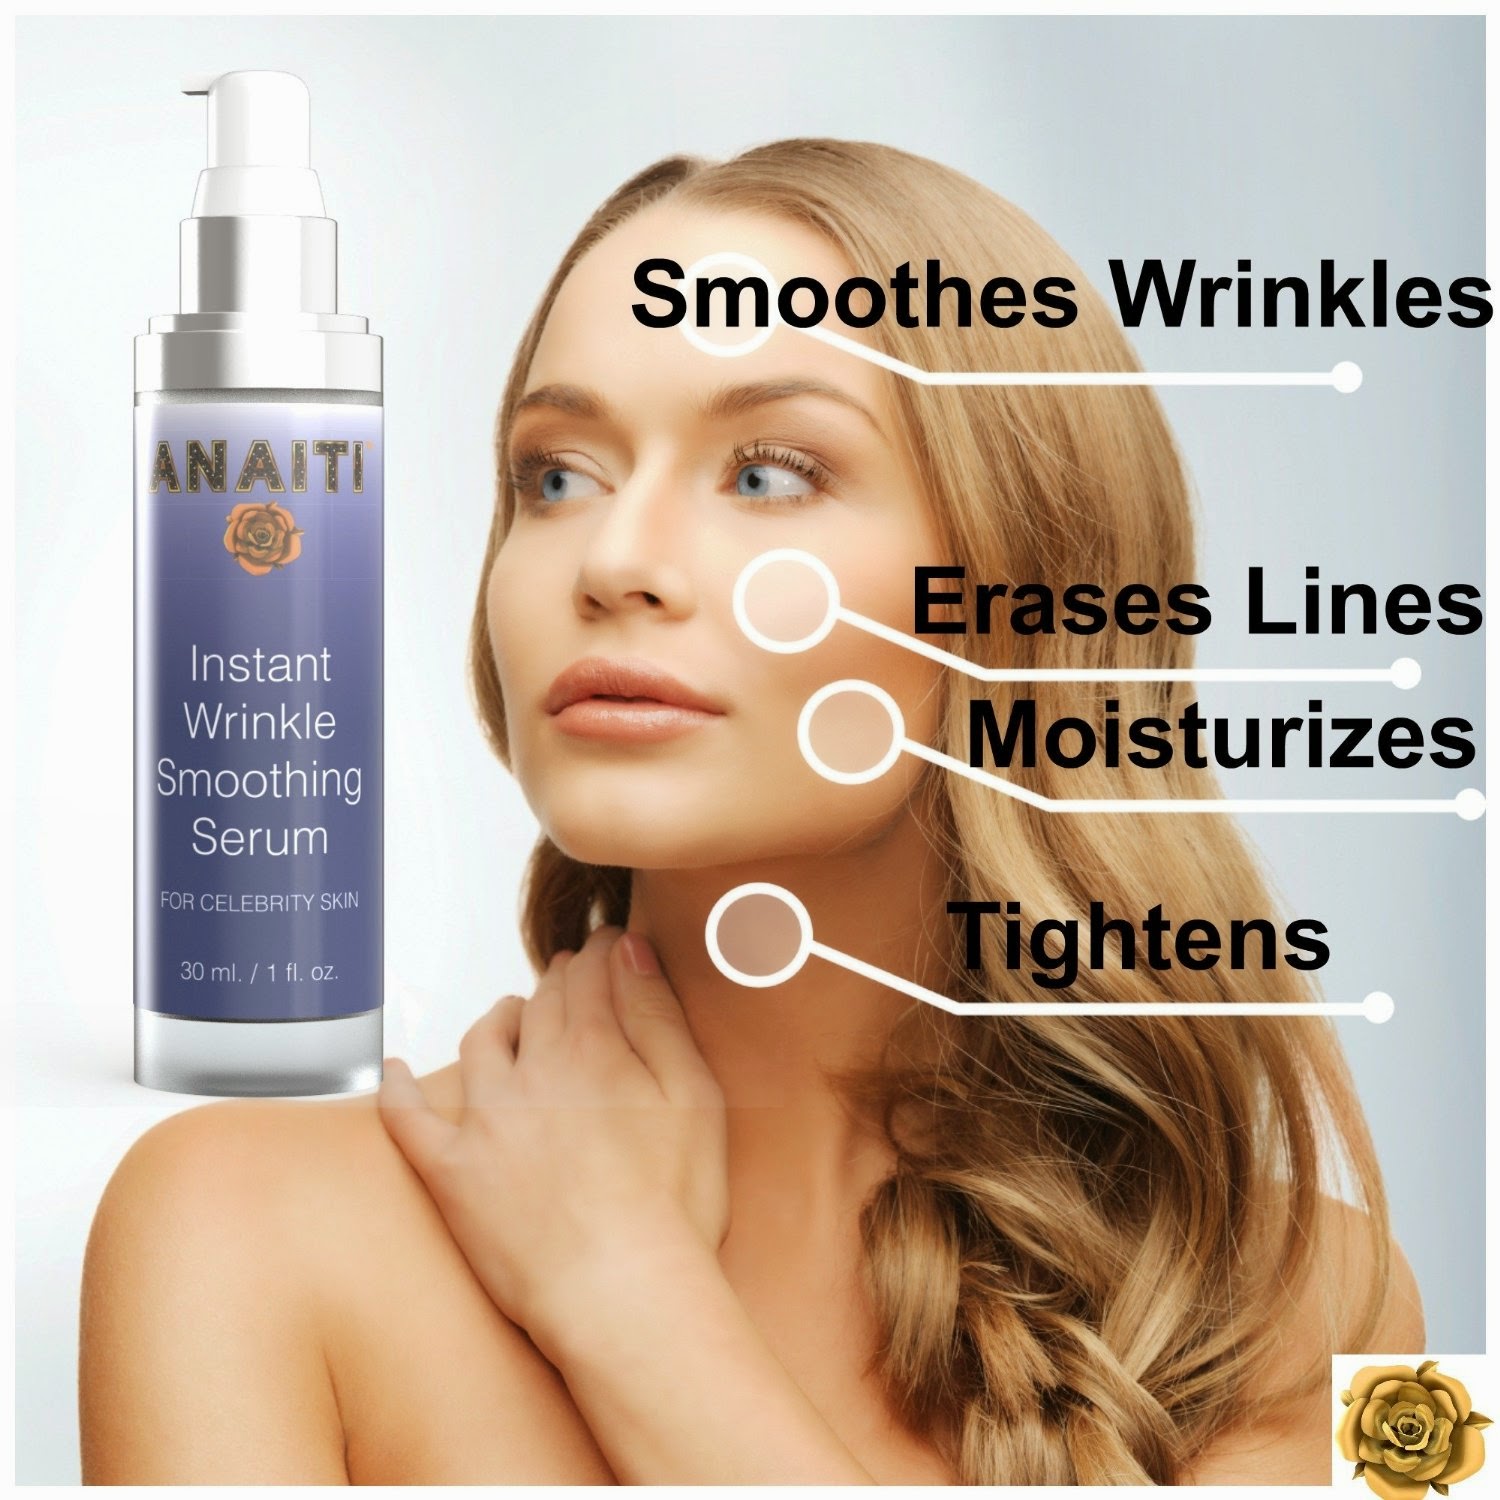 New Instant Wrinkle Smoothing Serum By Anaiti | Anti-Aging Skin Care Product Lifts, Tightens And Moisturizes The Skin | Formulated For Dermatologist Skin Care To Give Immediate Results And Long-Term Benefits | Facial Care That Erases Wrinkles & Lines | Skinceuticals For Celebrity Skin! | 100% Satisfaction Guaranteed.